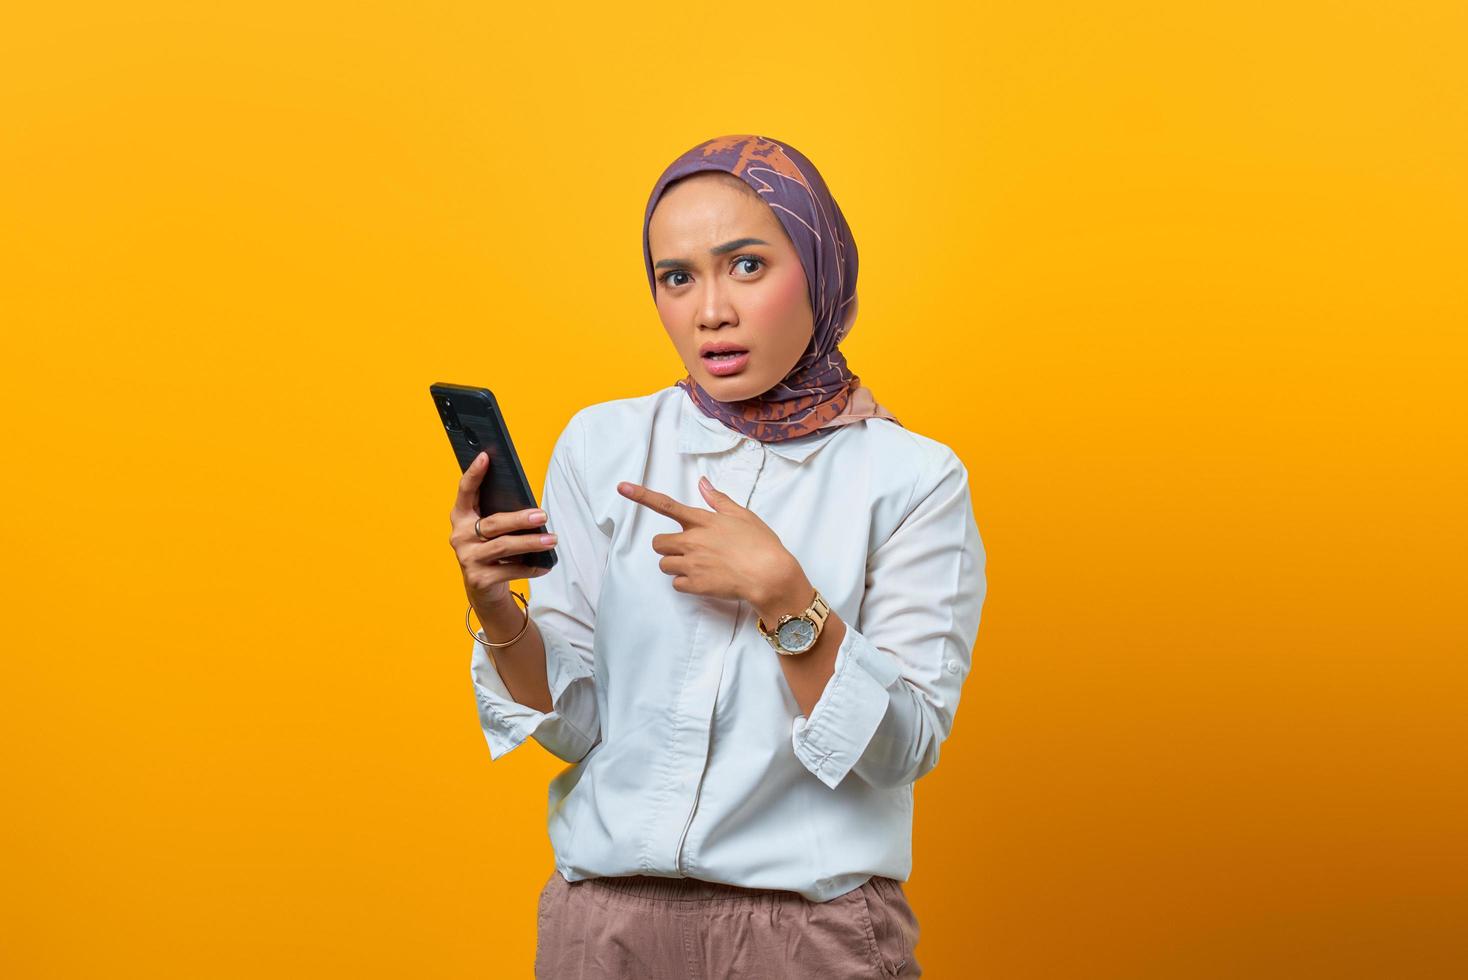 Surprised Asian woman while pointing smartphone over yellow background photo